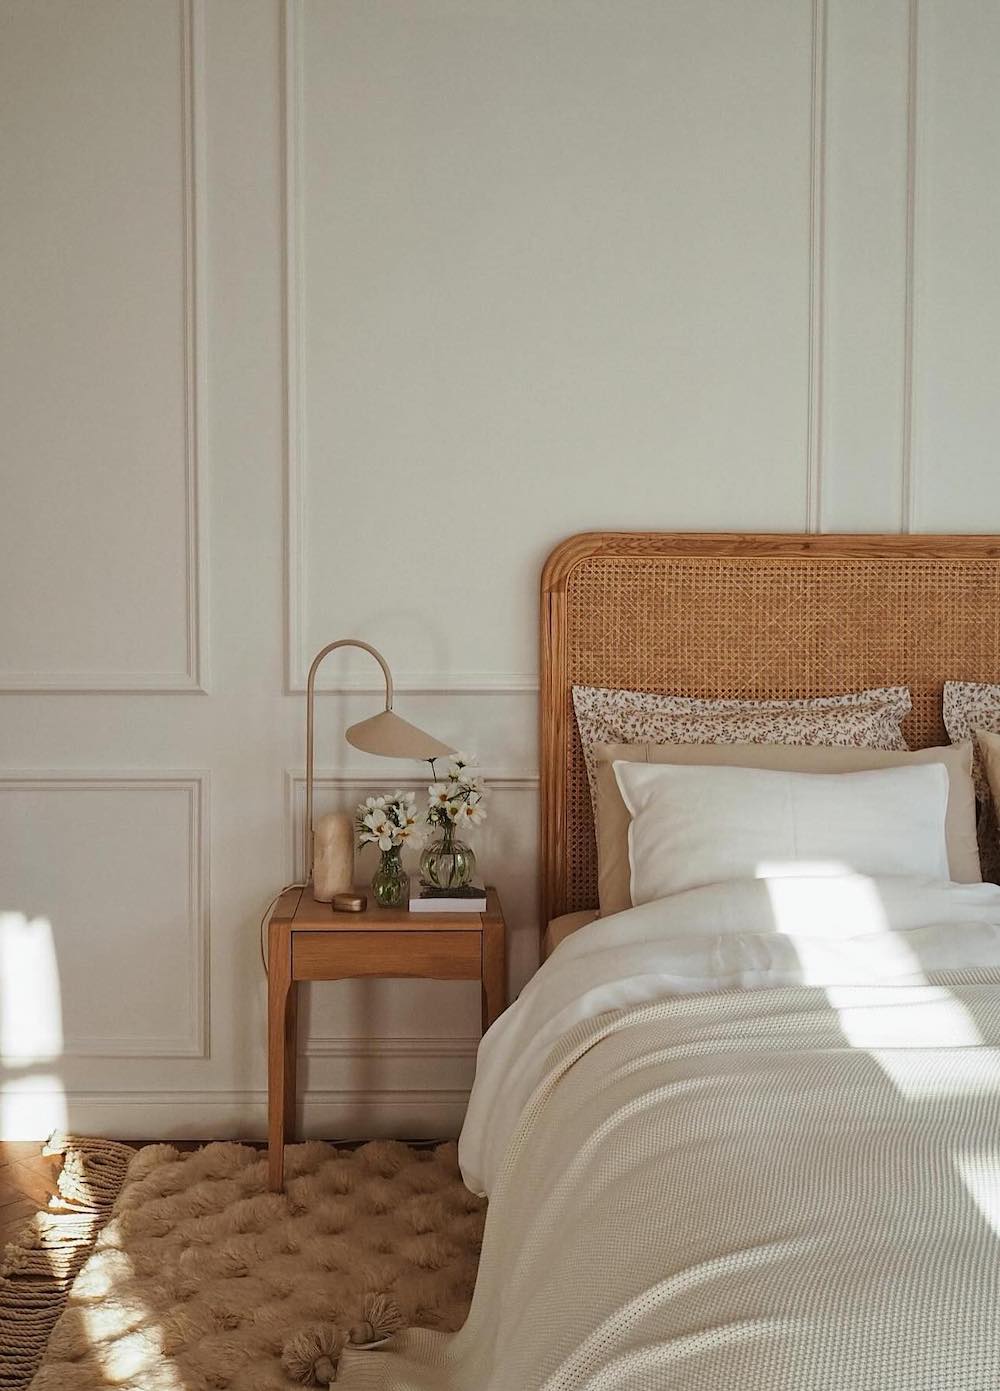 a bohemian-inspired minimalist bedroom with a rattan headboard, floral decor, and earthy tones